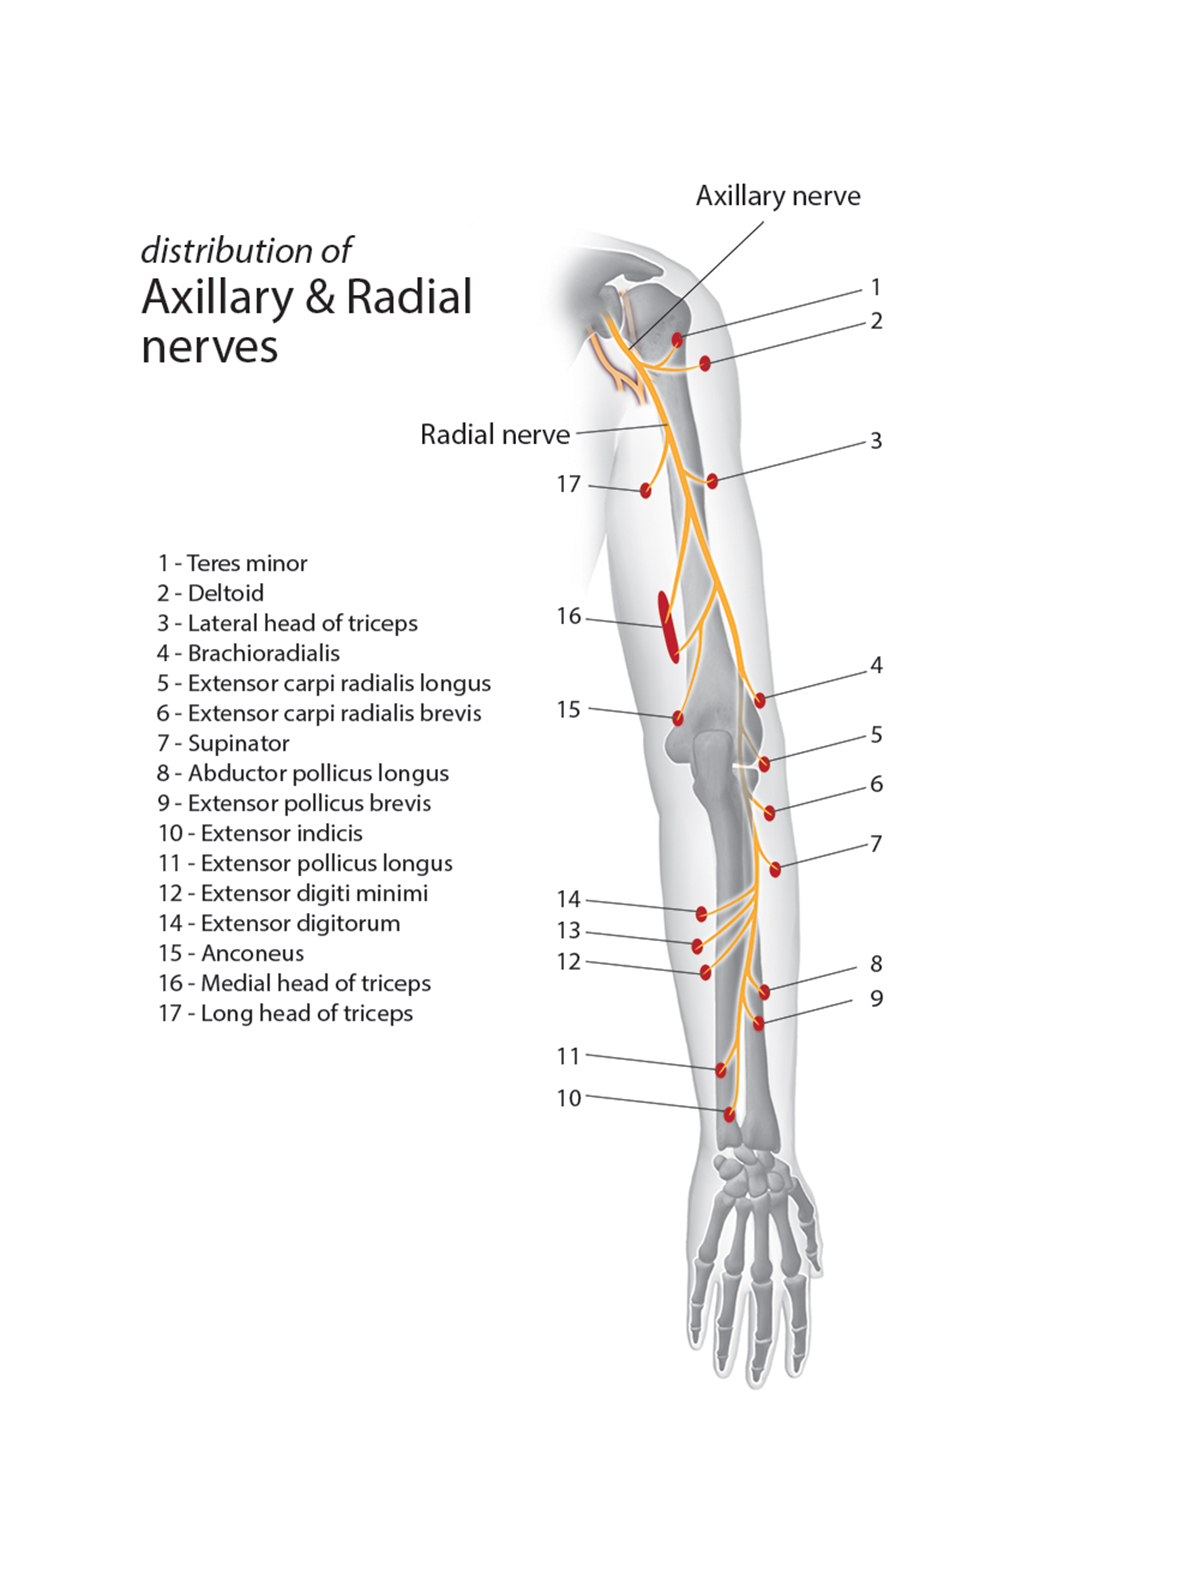 Distribution of Radial Nerve Motor Branches